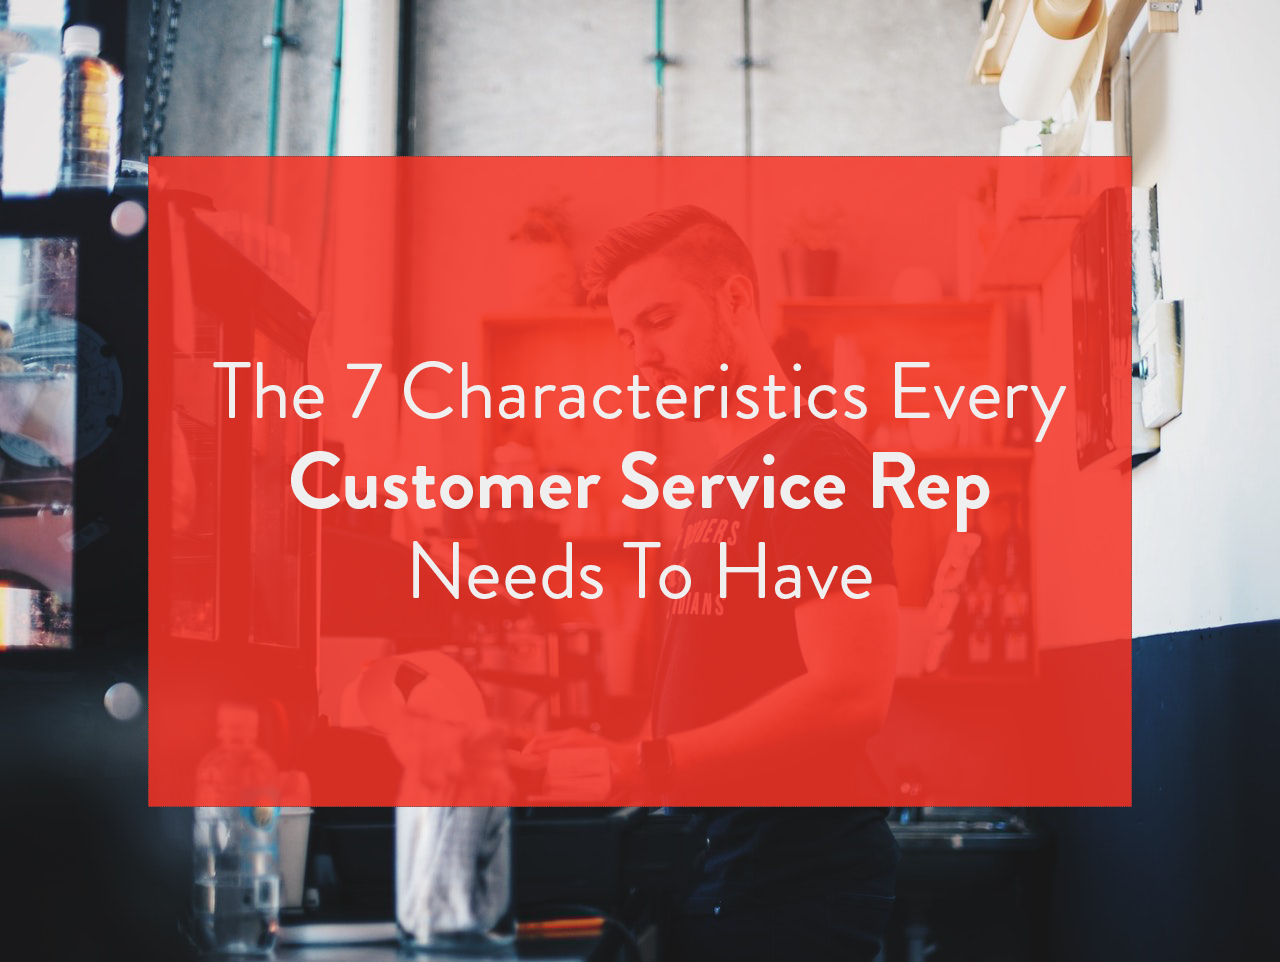 5 Skills Every Customer Service Rep Must Have